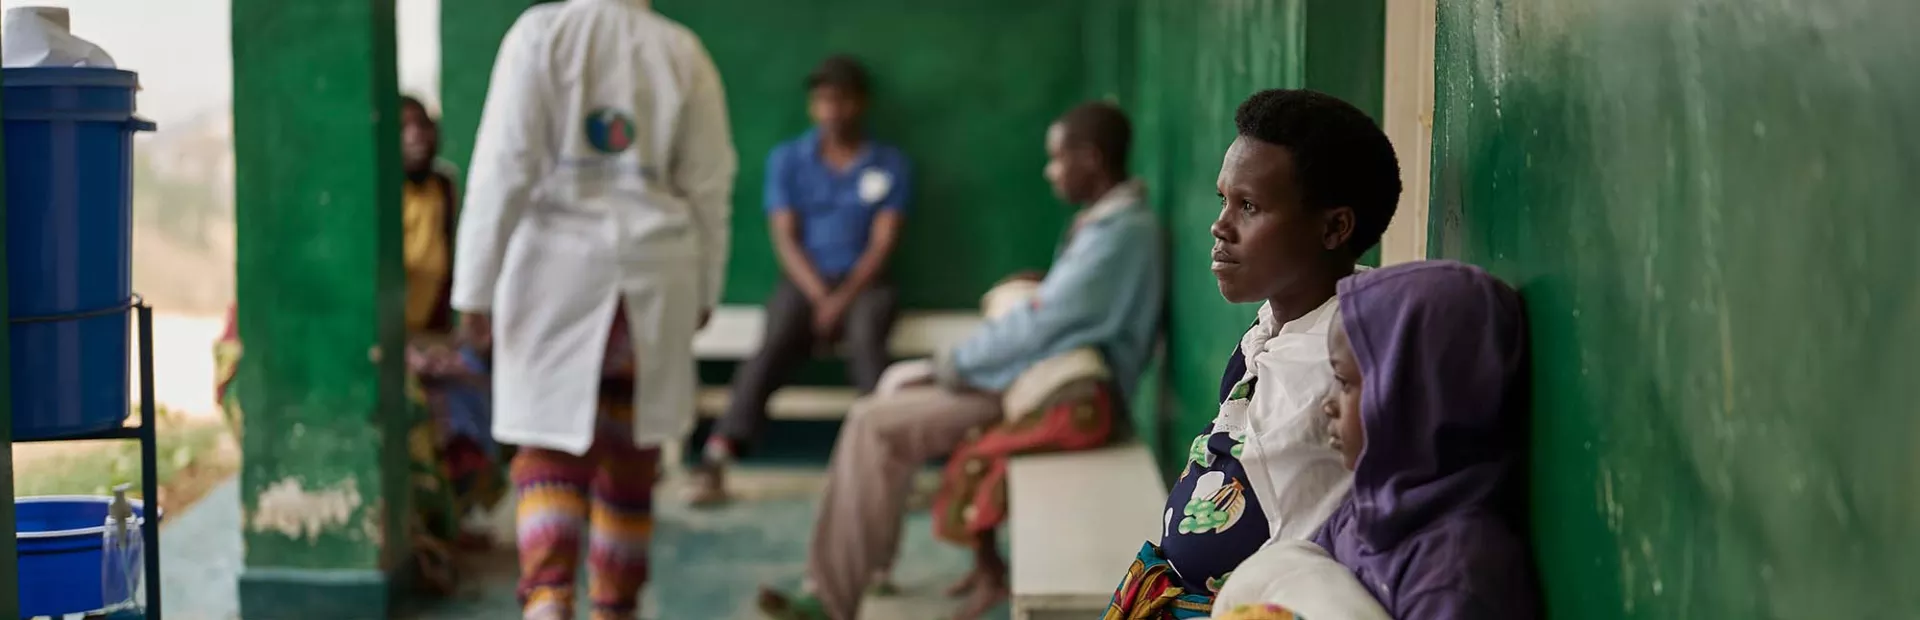 Young patients waiting outside an hospital in Rwanda